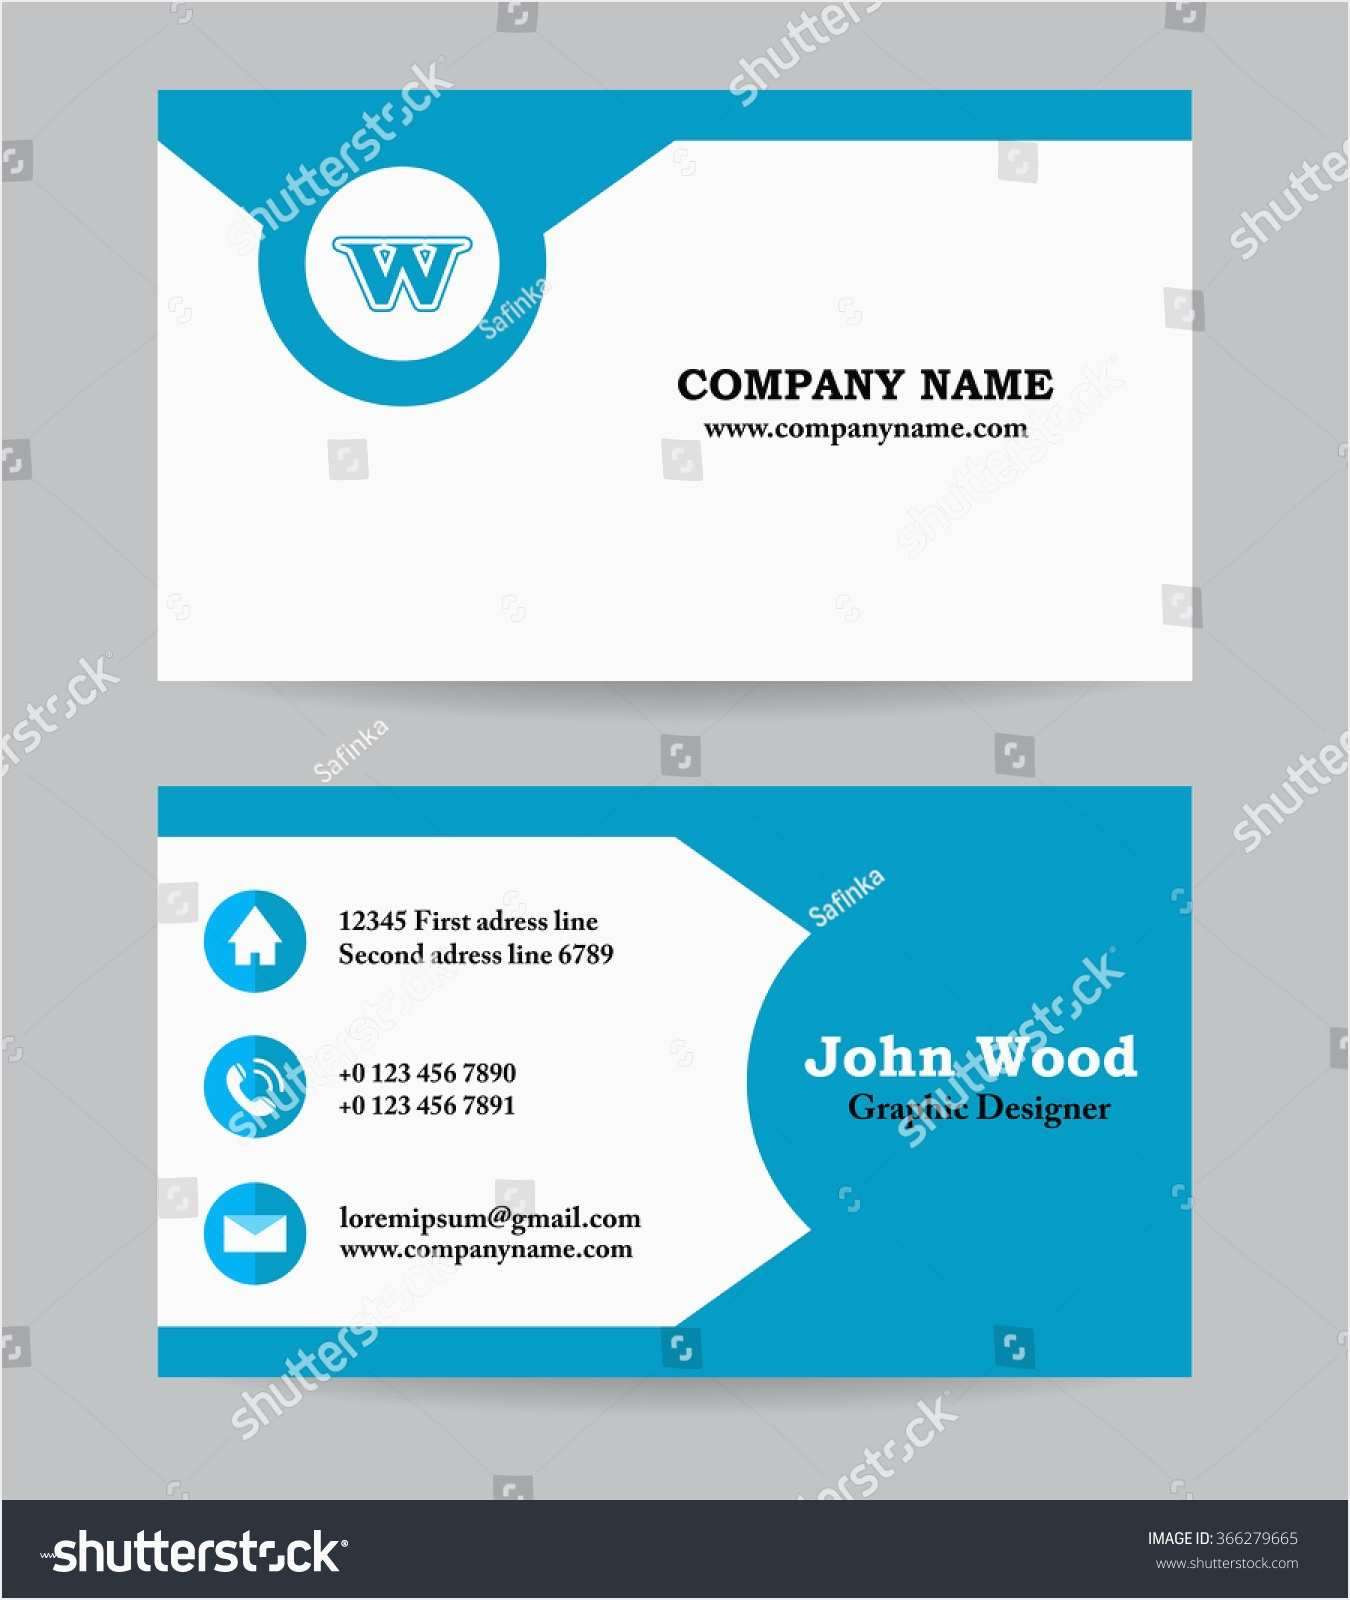 ibm business card template new name card template fresh beautiful sample business card layout of ibm business card template